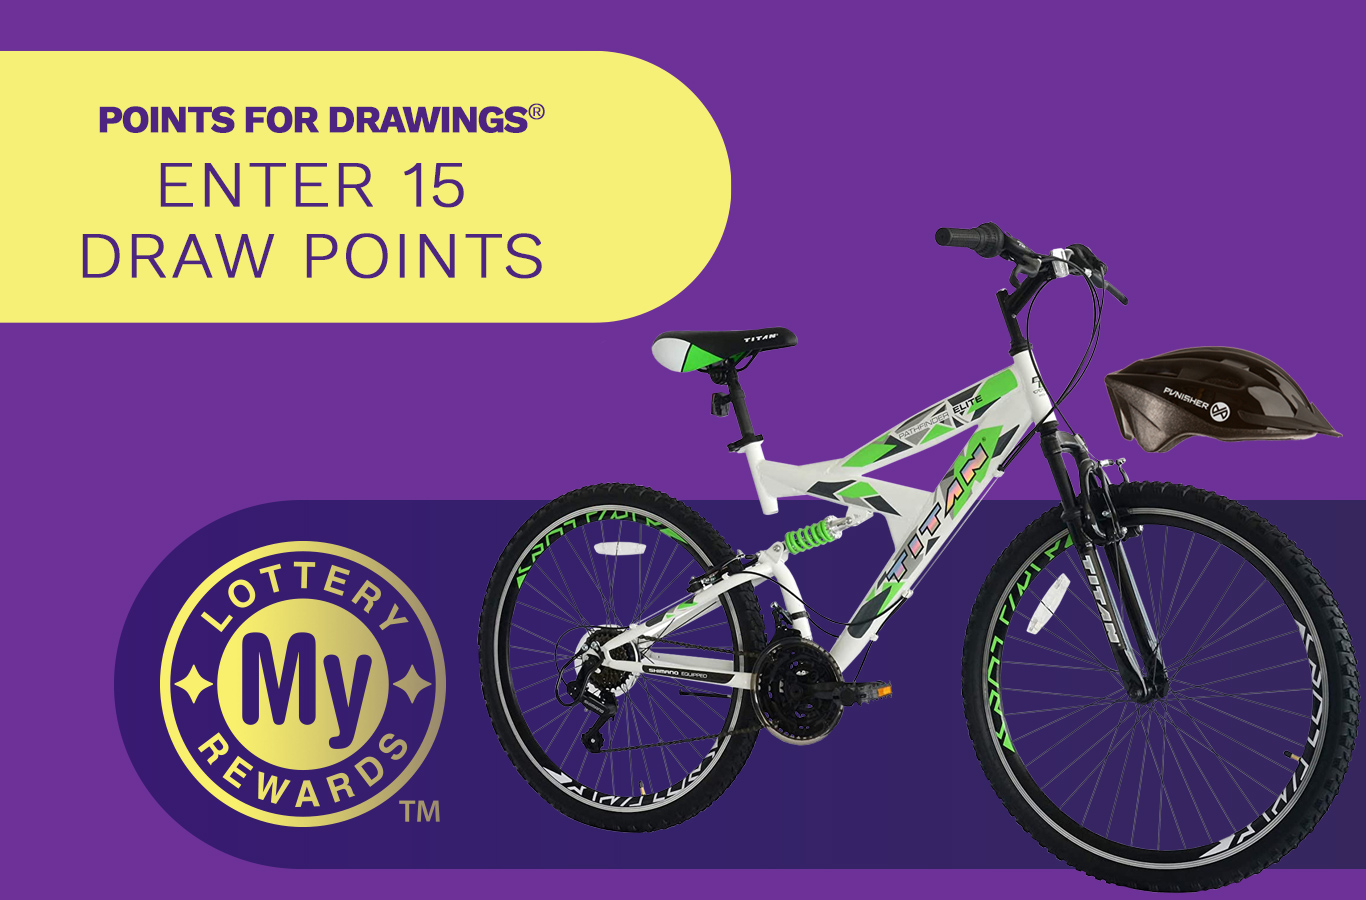 Here's your chance to win a Mountain Bike! Enter by Tuesday, August 8th.